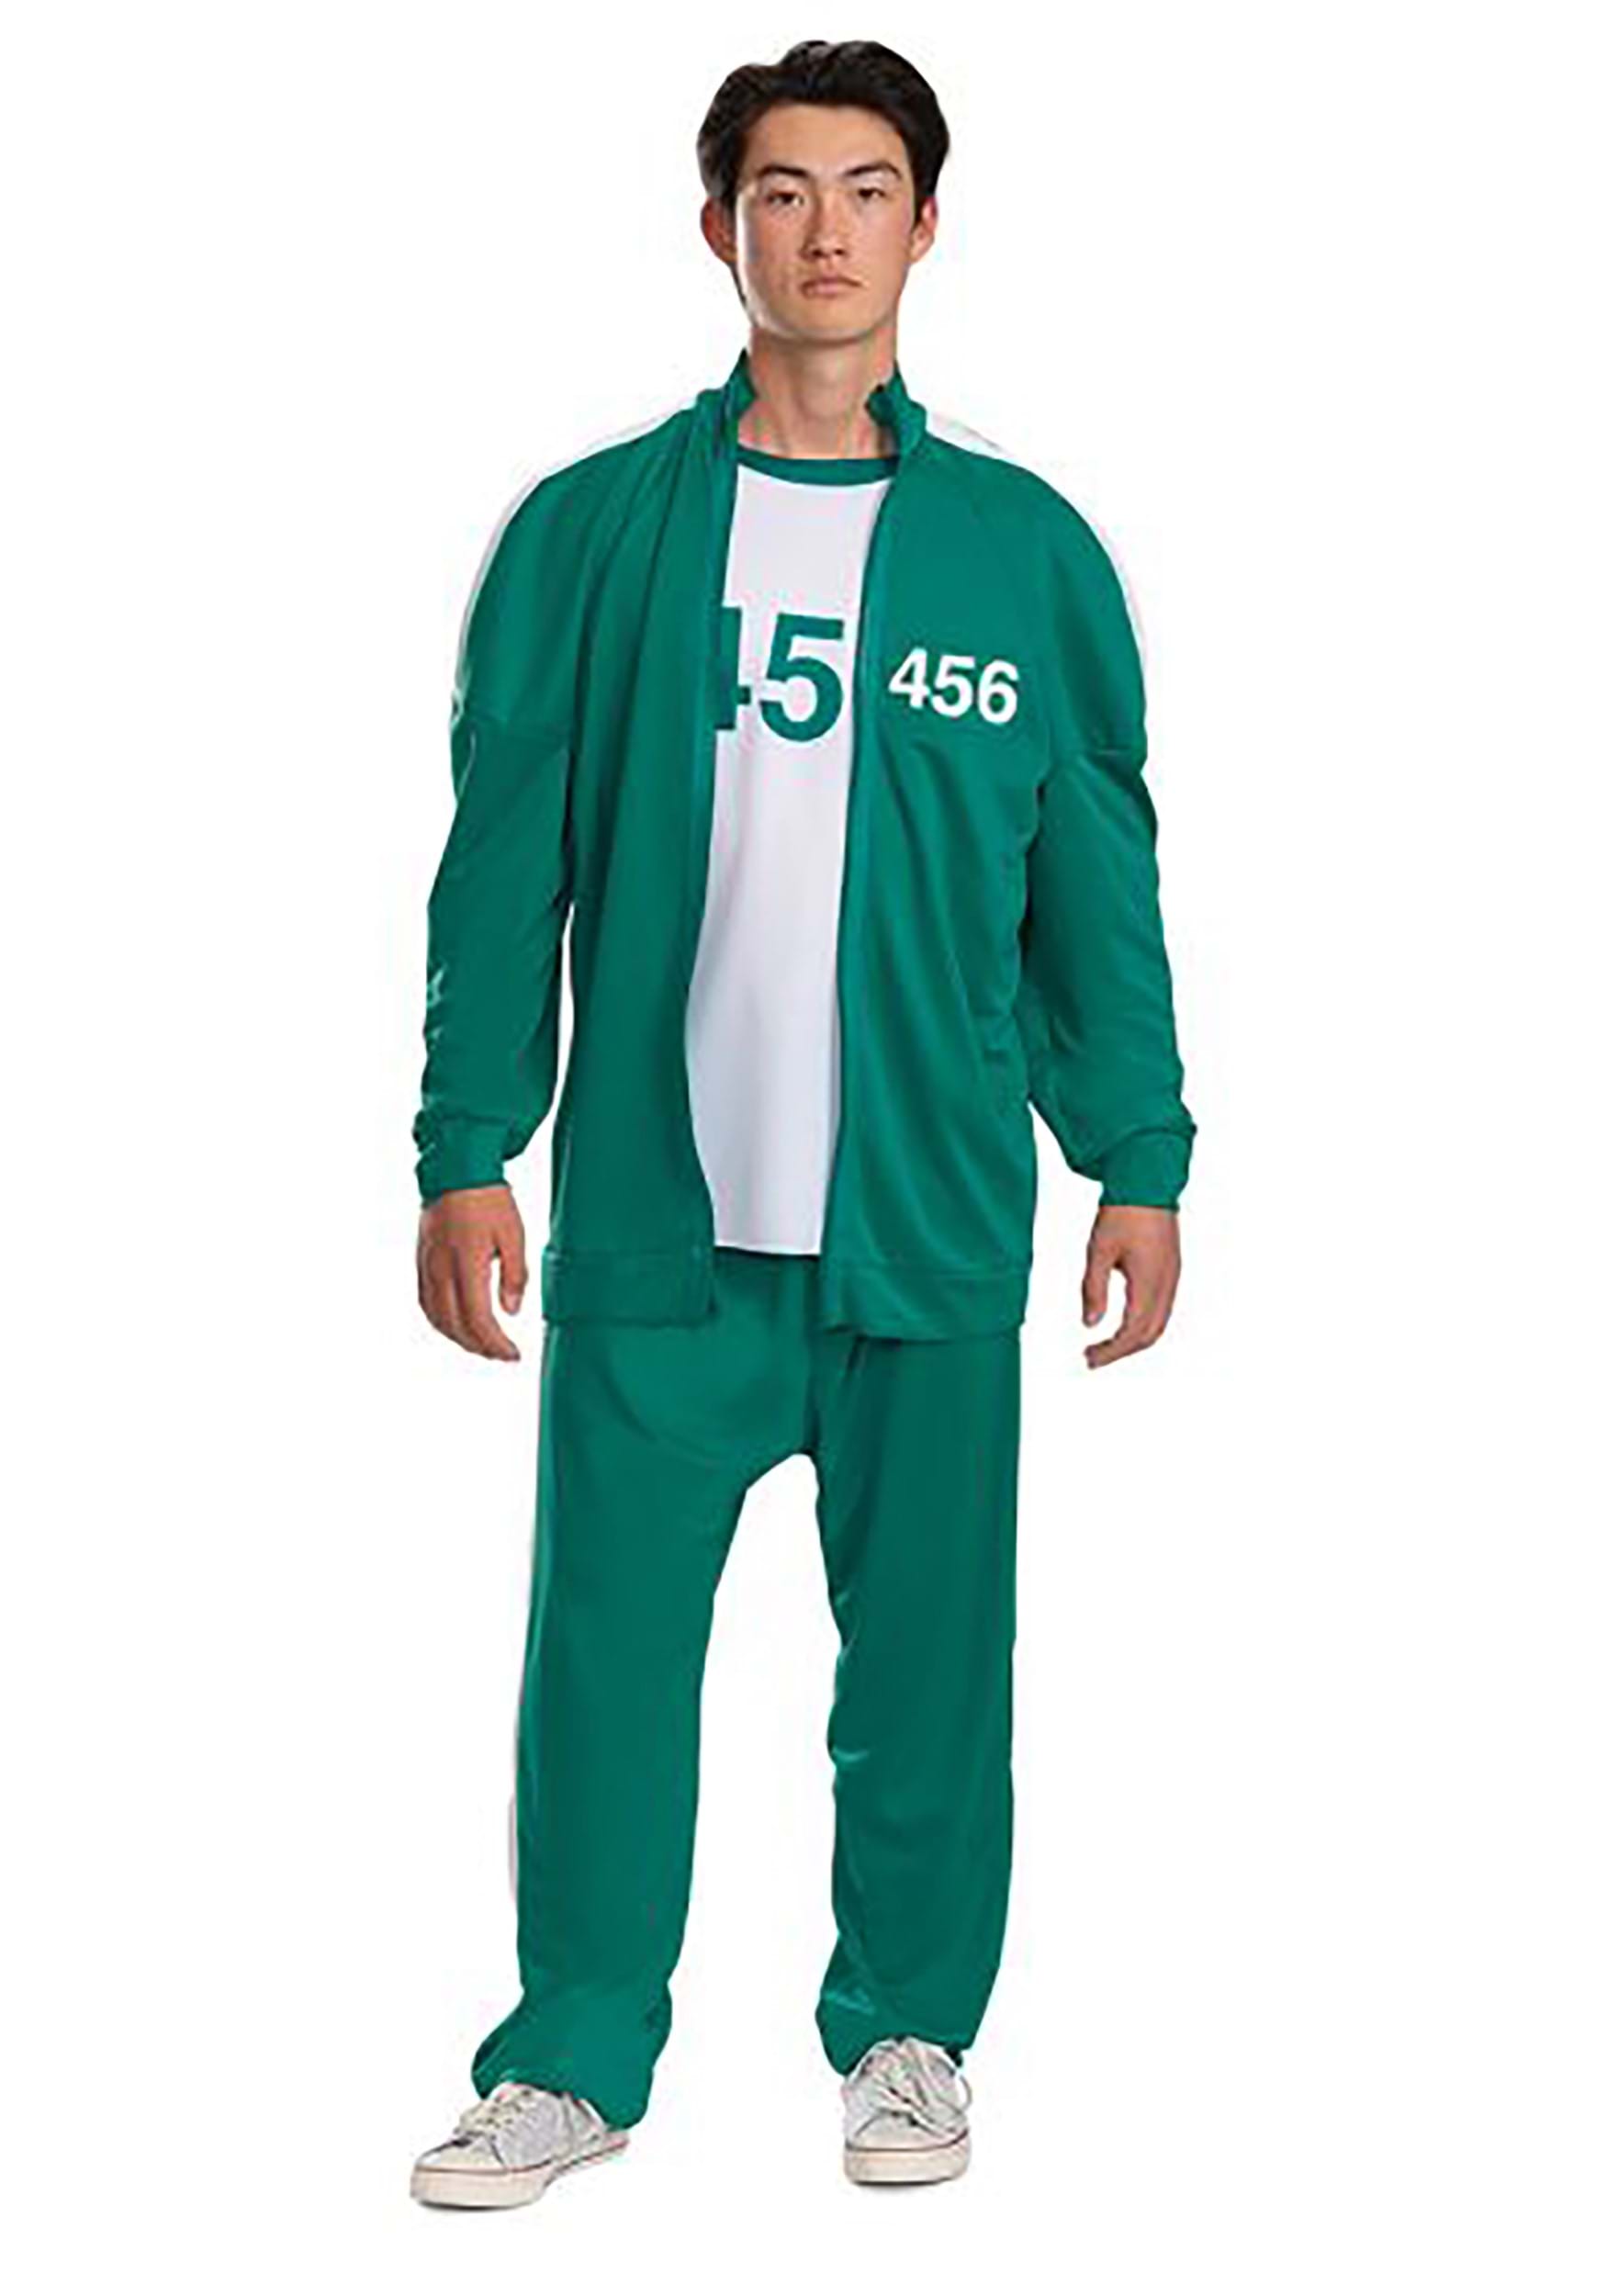 Adult Squid Game Player 456 Track Suit